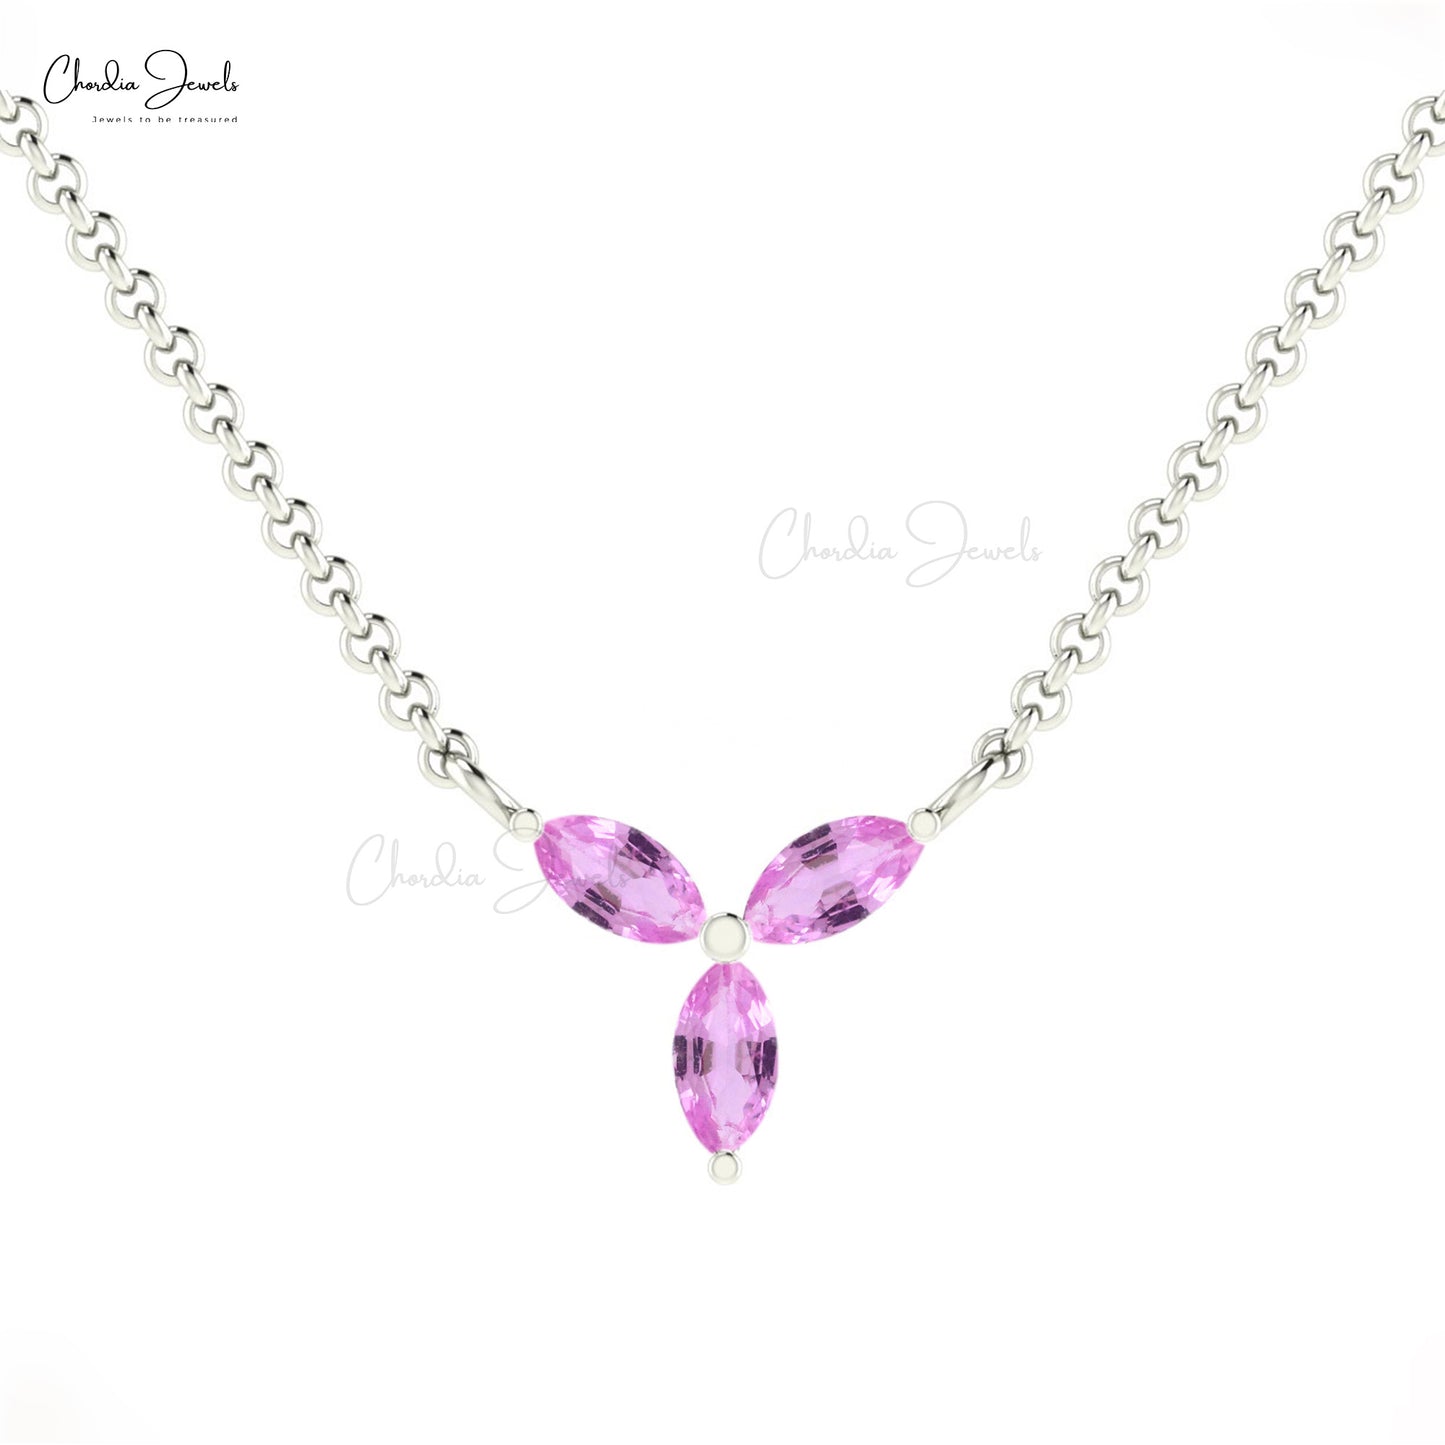 Authentic Pink Sapphire Necklace